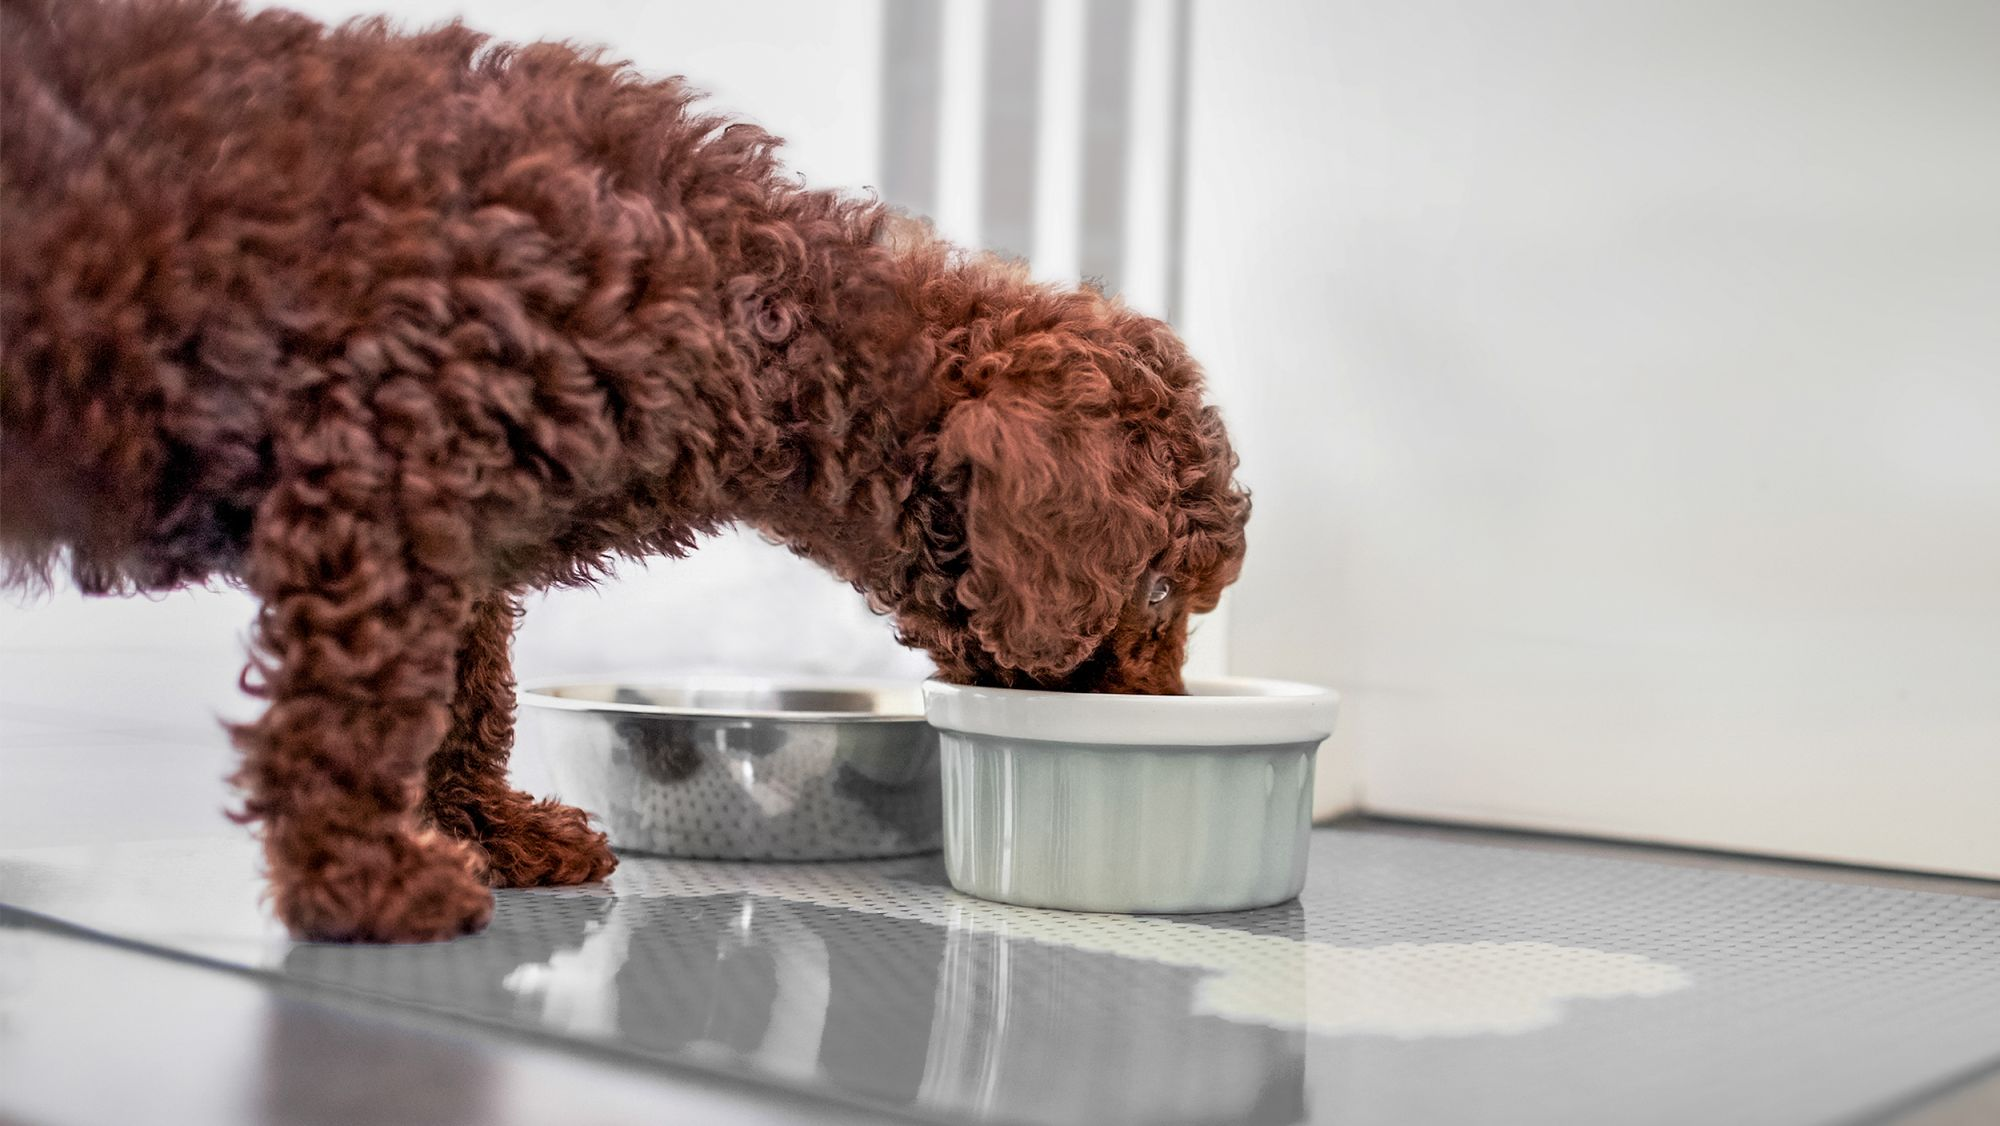 Puppy Poodle standing indoors eating from a ceramic bowl.